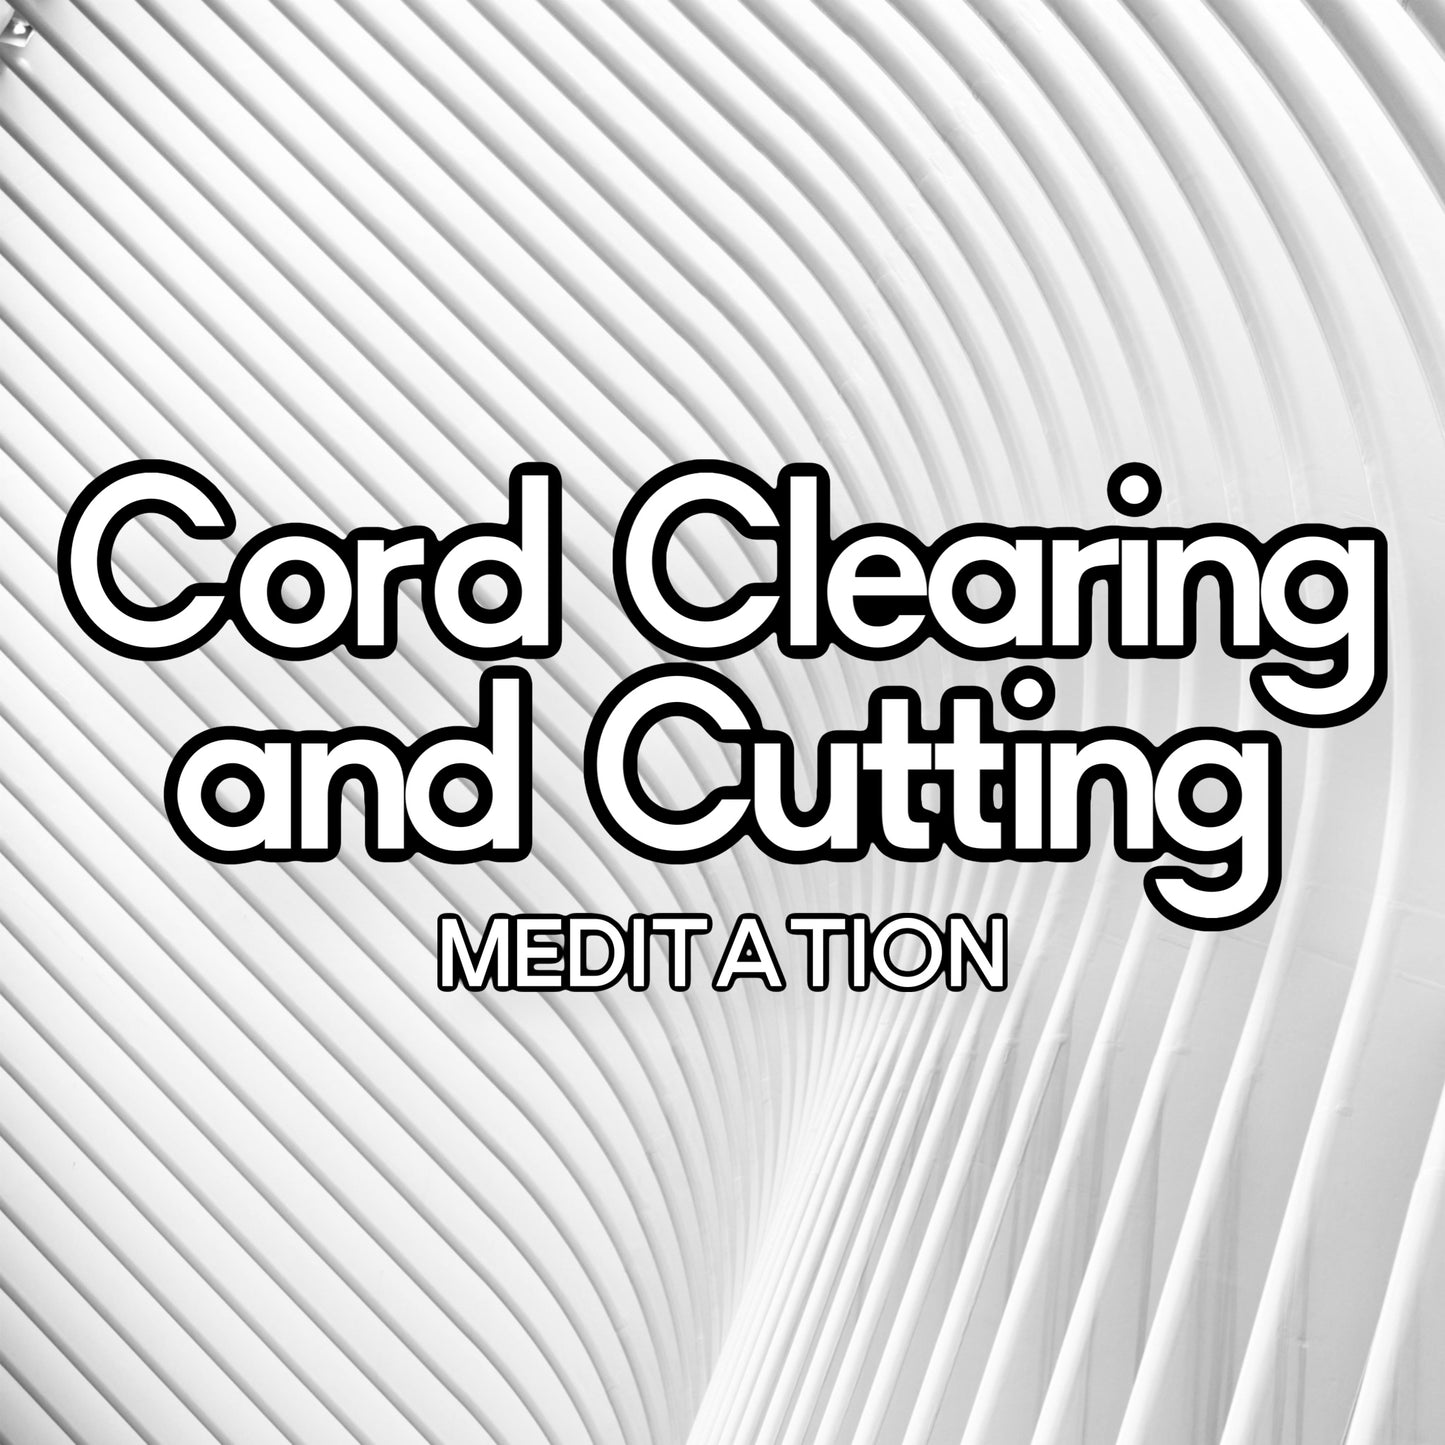 Cord Clearing and Cutting